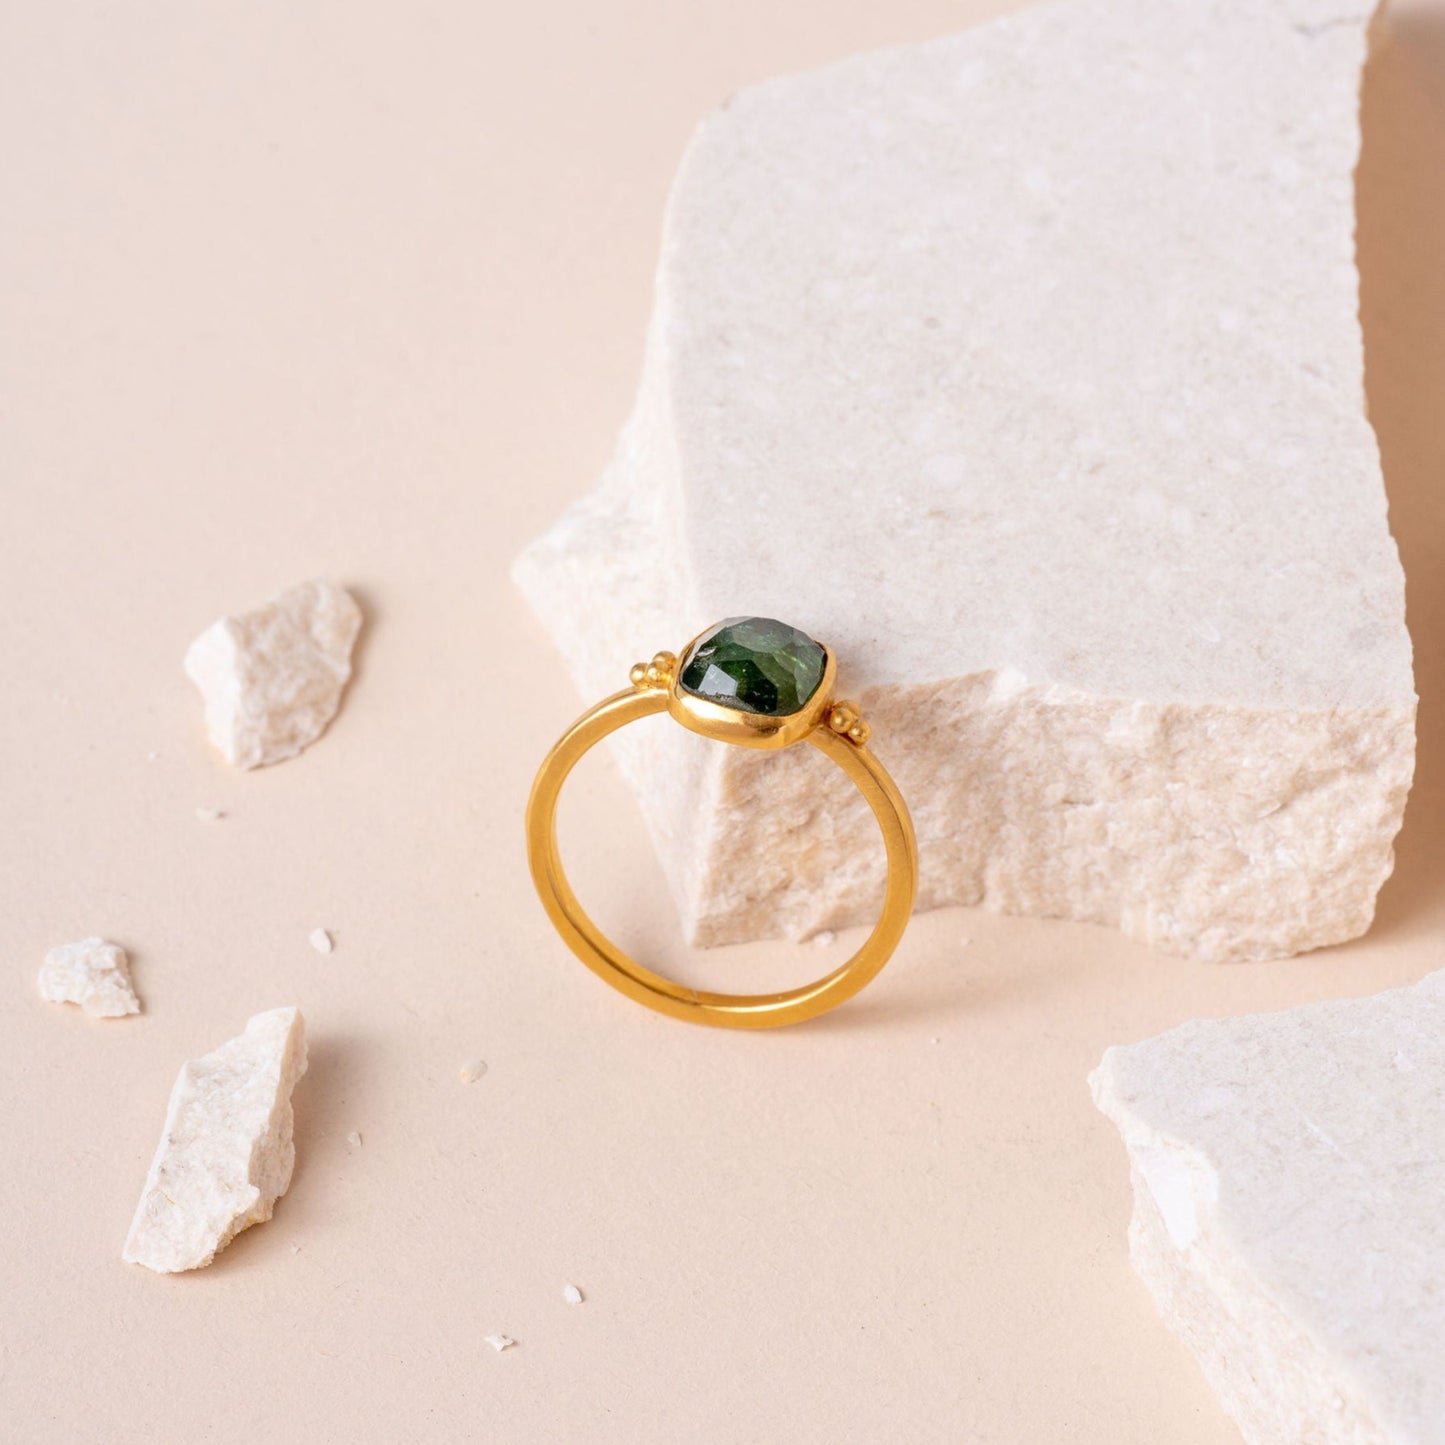 Elegantly captured gold ring, designed with meticulous granulation and accentuated by a single, vibrant green tourmaline gemstone